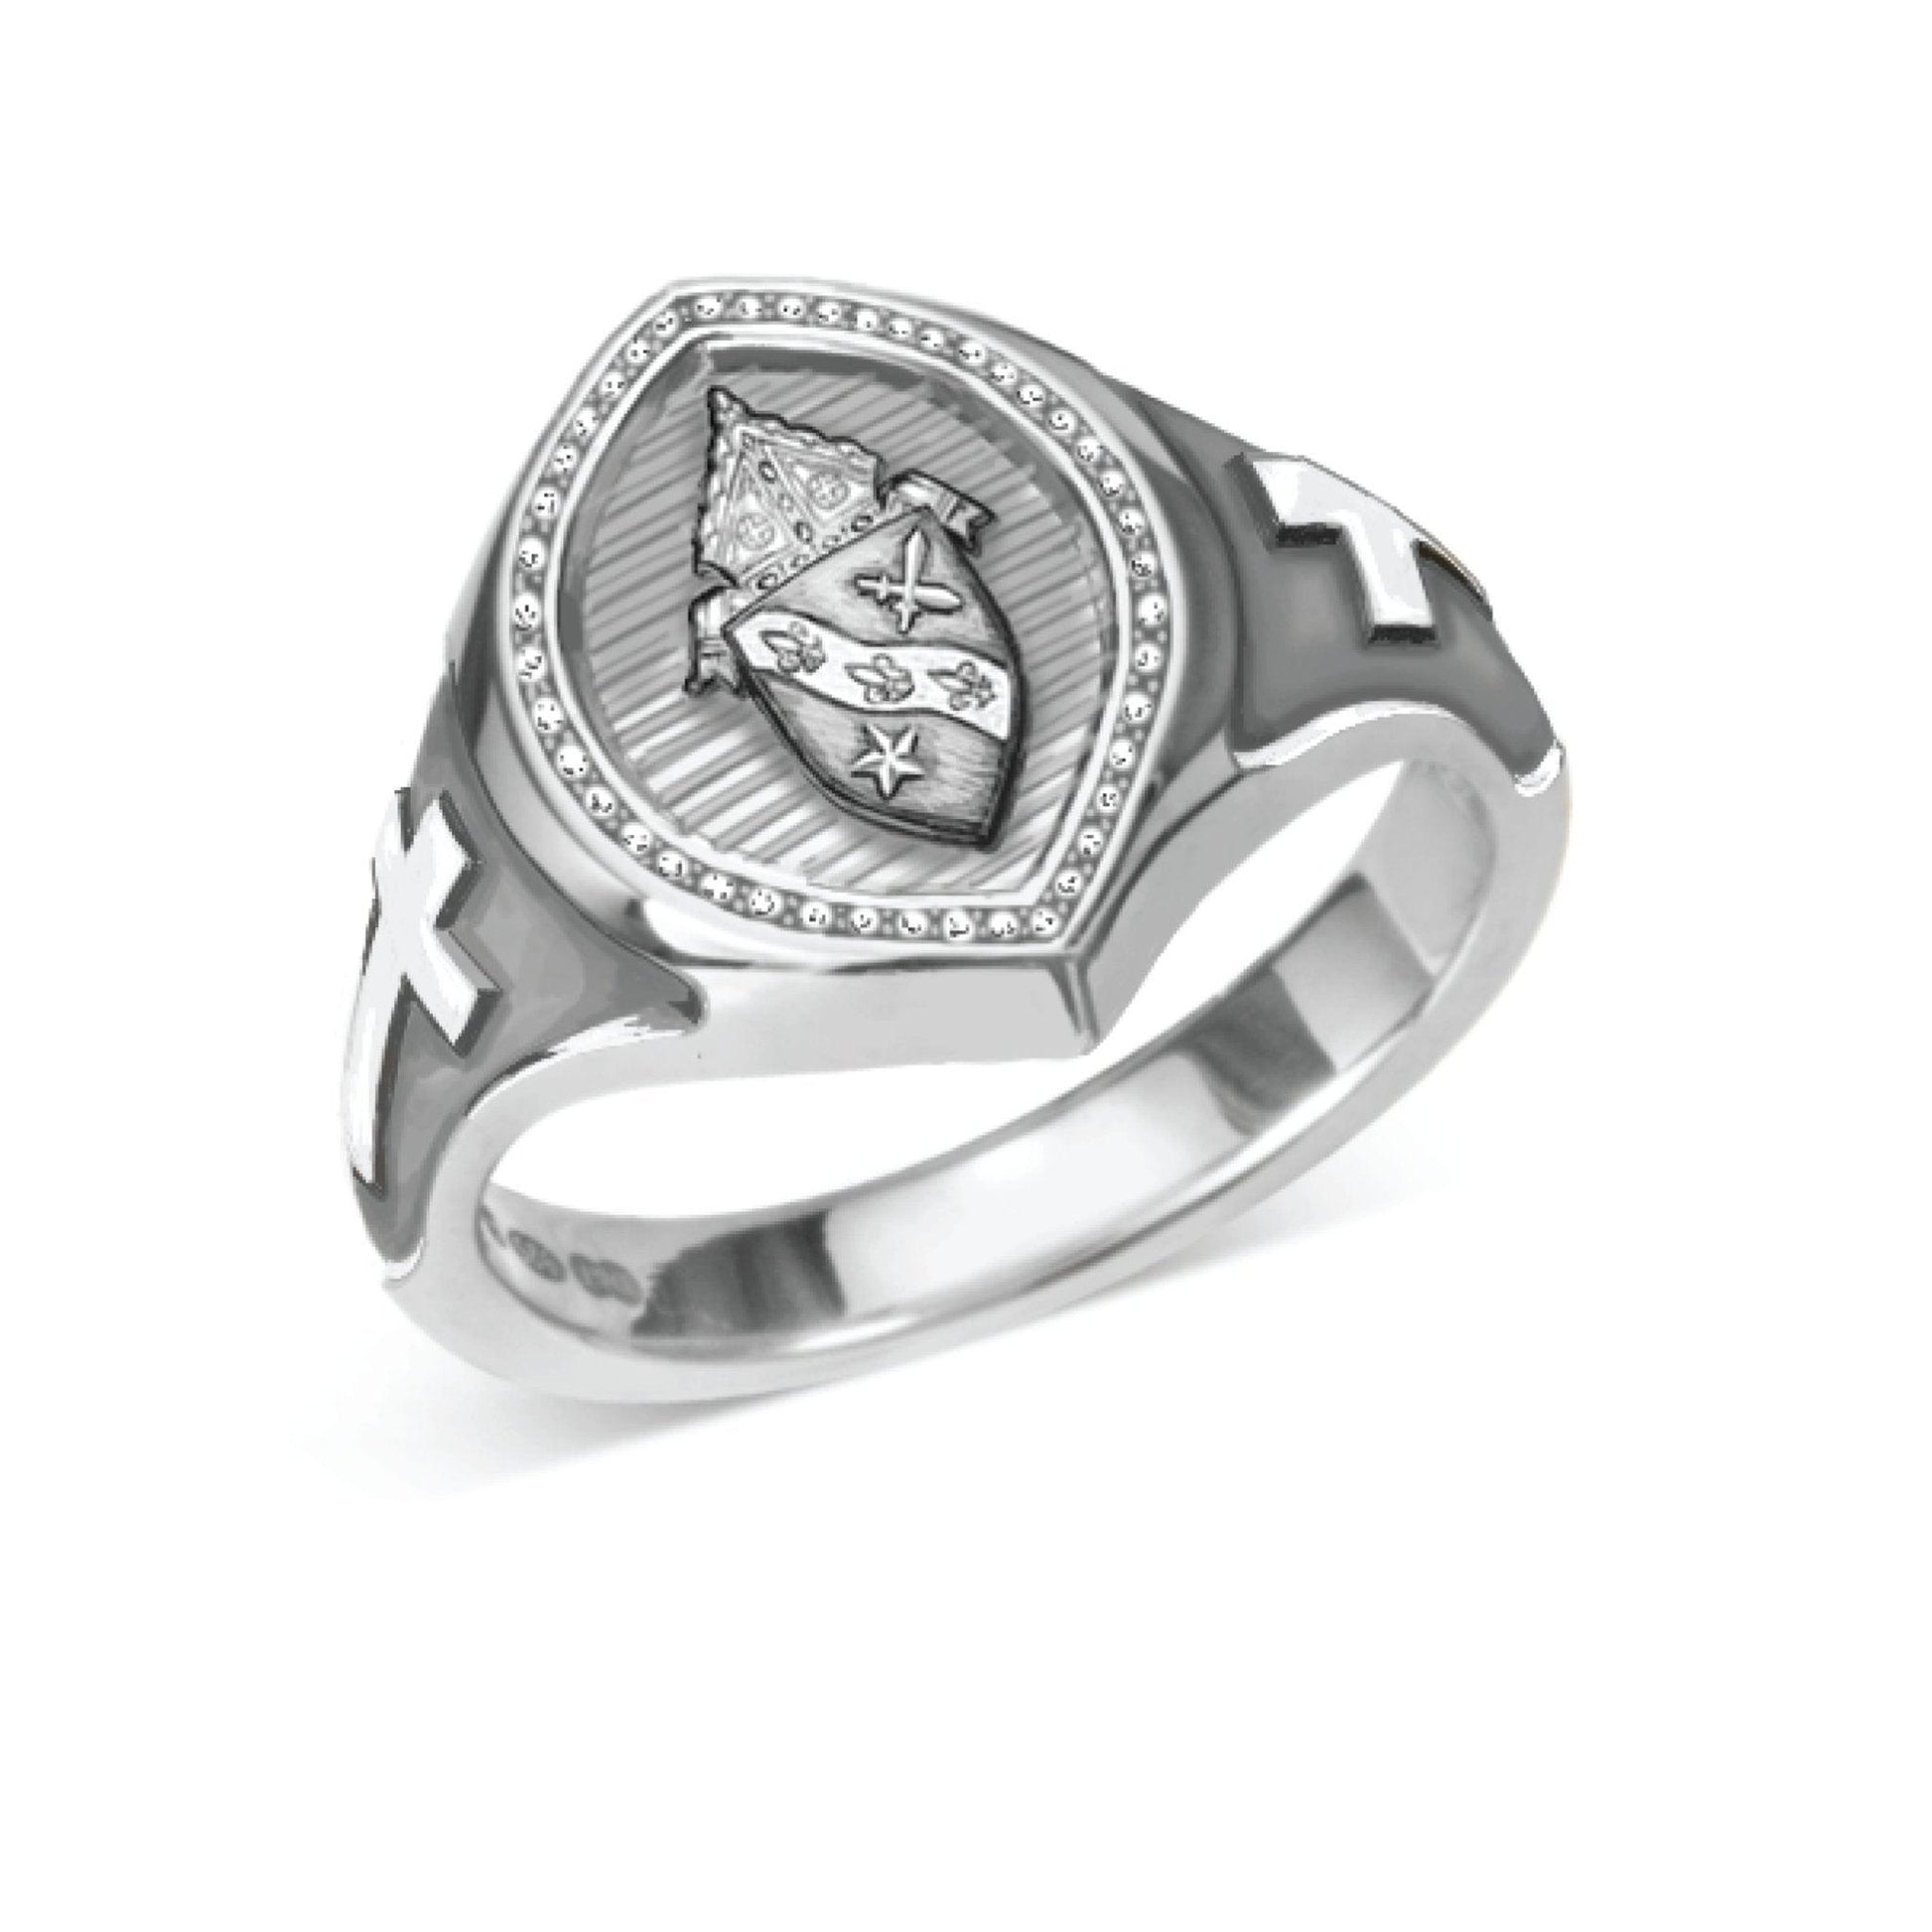 Sterling Silver Custom Engraved Bishop Ring with Crosses and Diamond Border - Watts & Co.